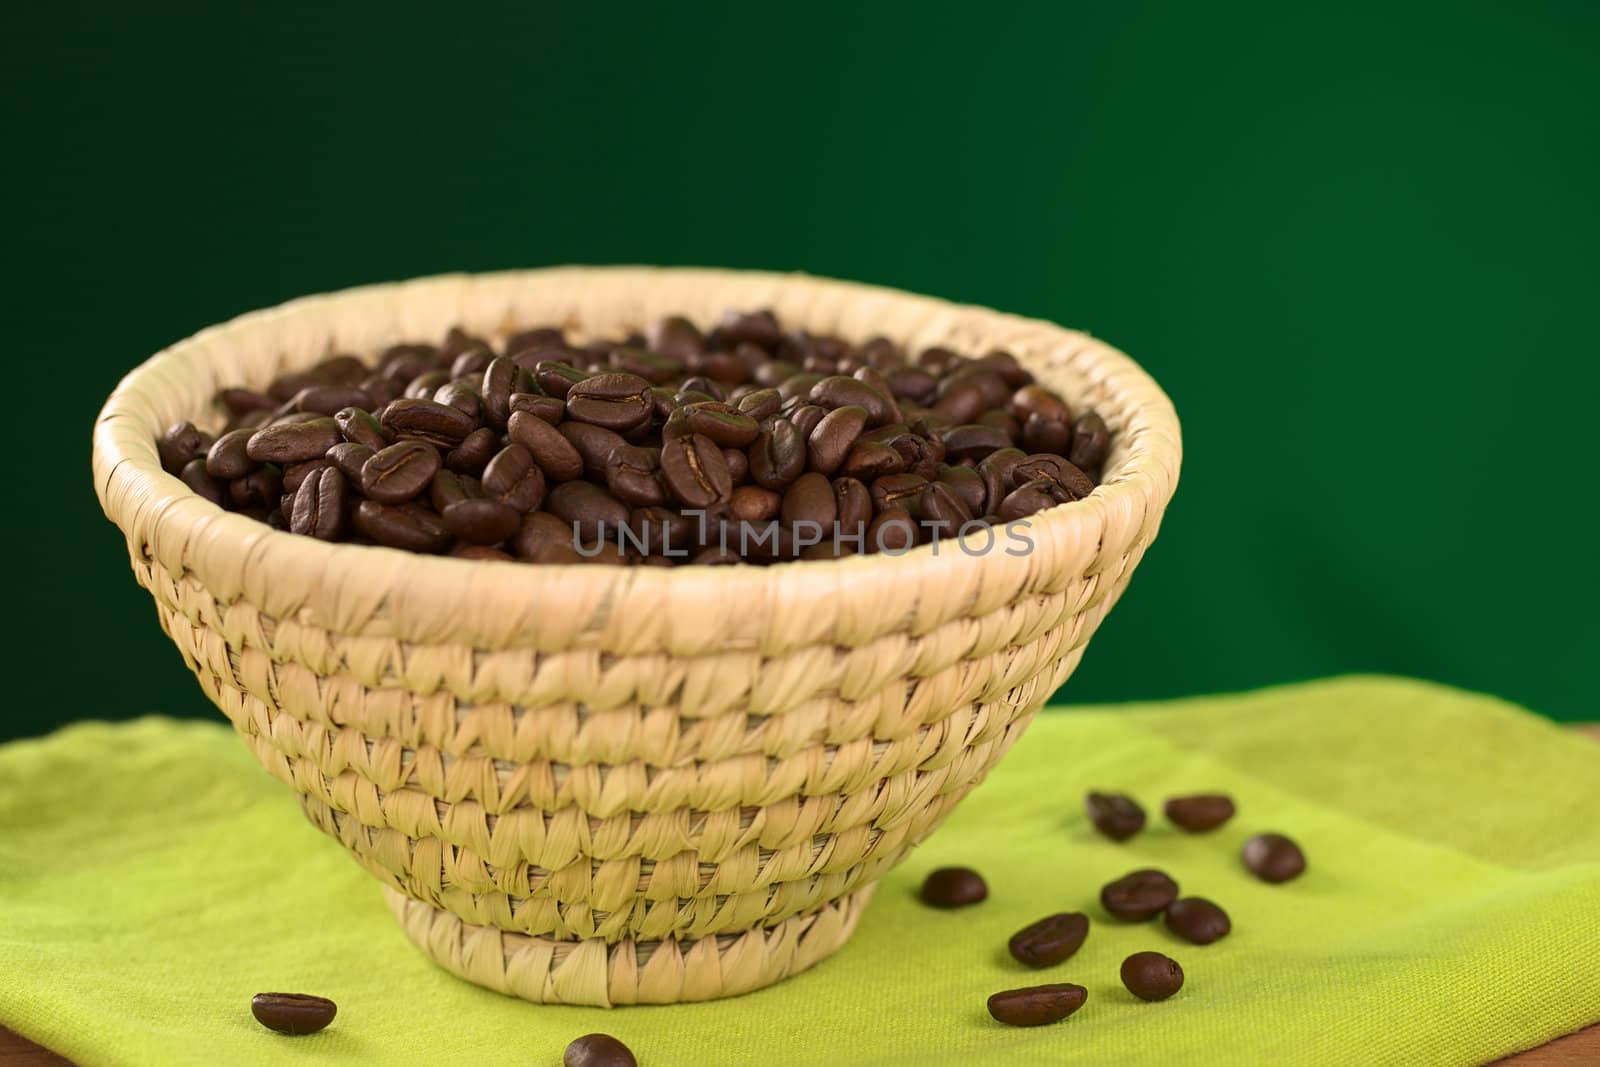 Roasted coffee beans in woven basket with green background (Selective Focus, Focus on the coffee beans in the middle of the basket)